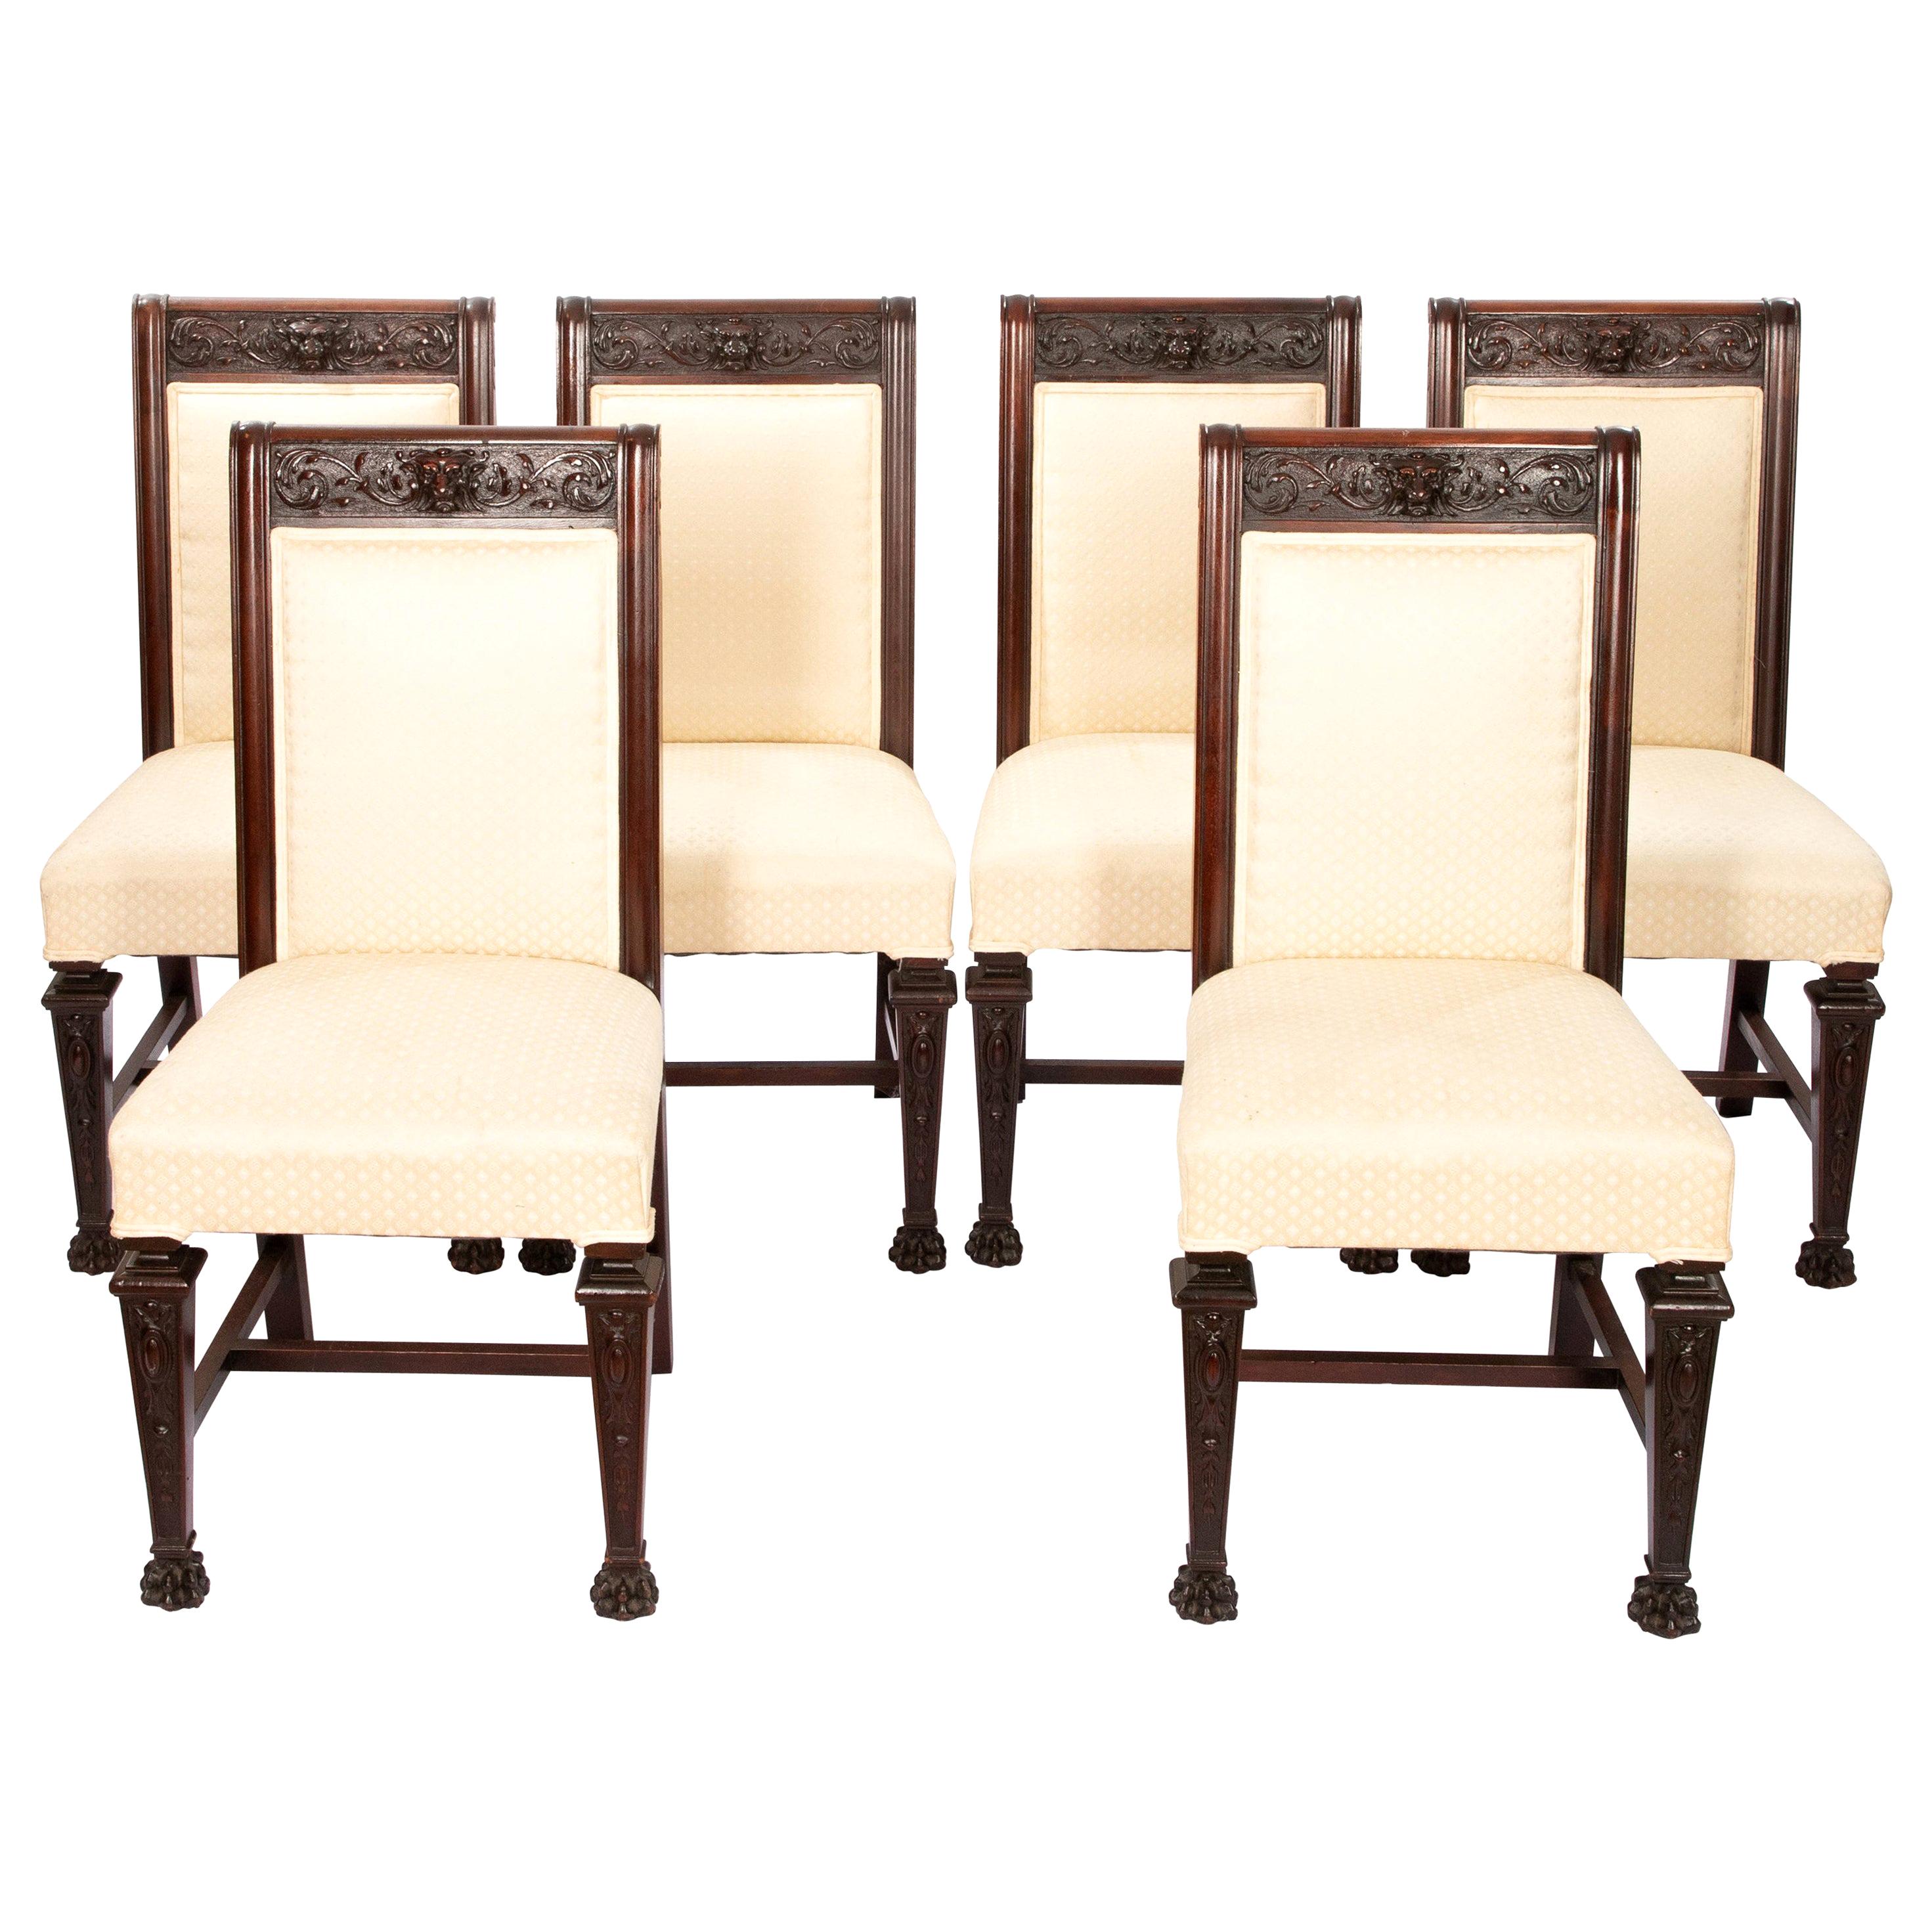 Horner Chairs Set of 6 Cream Cotton Upholstery Art Nouveau For Sale